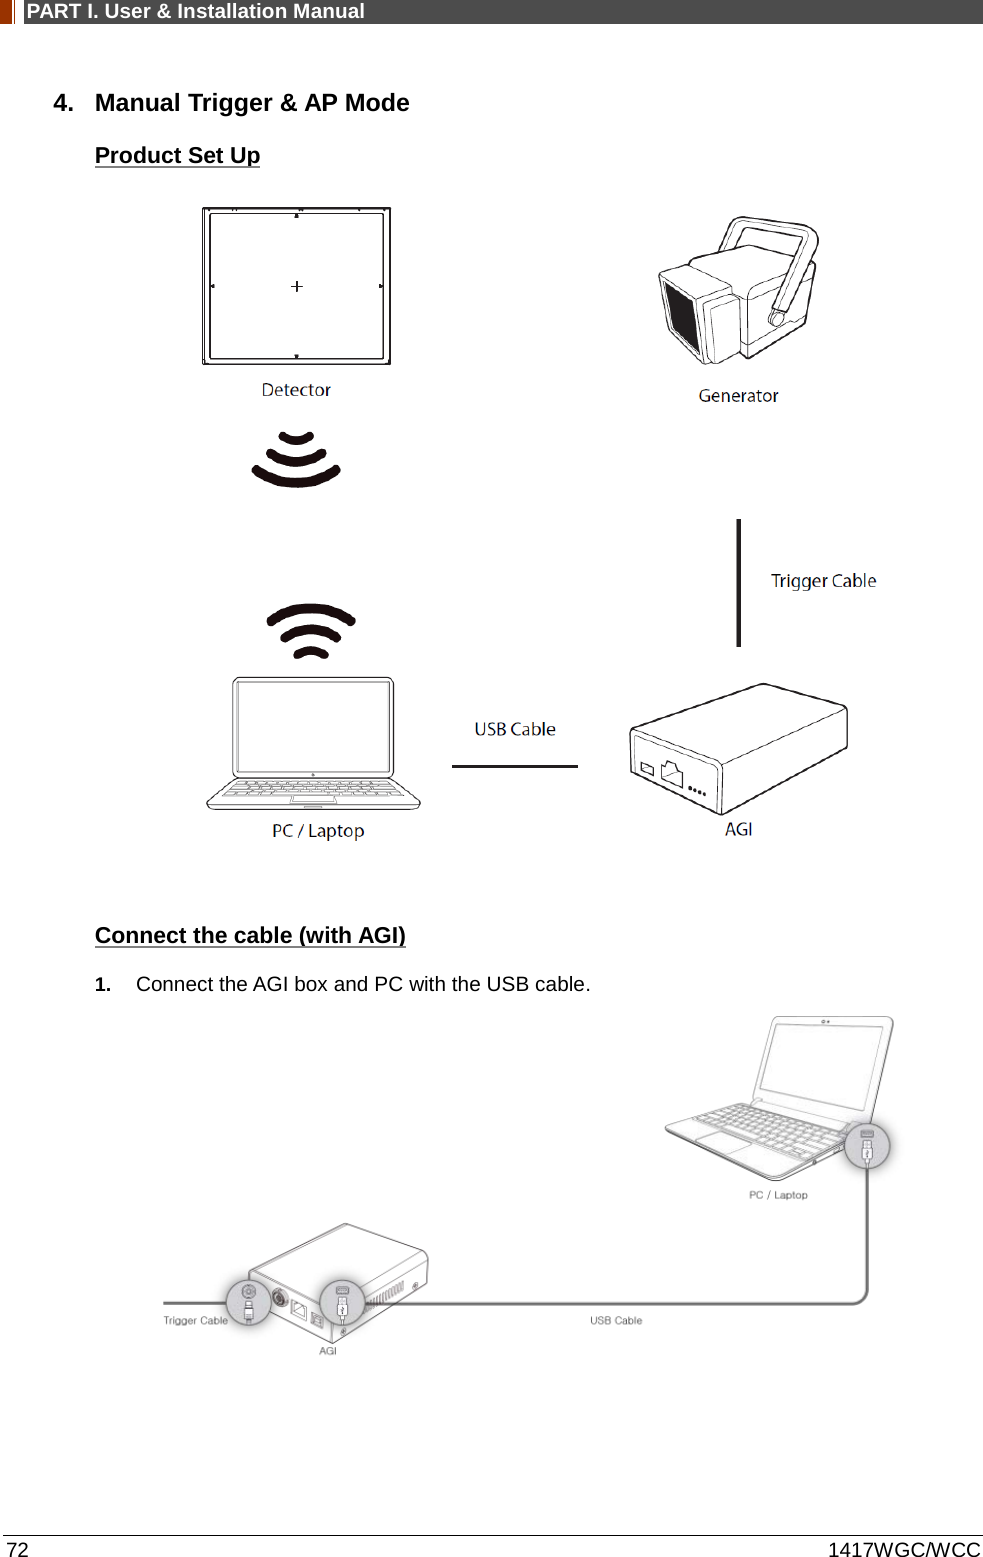 PART I. User &amp; Installation Manual 72 1417WGC/WCC 4. Manual Trigger &amp; AP Mode Product Set Up   Connect the cable (with AGI) 1. Connect the AGI box and PC with the USB cable.    